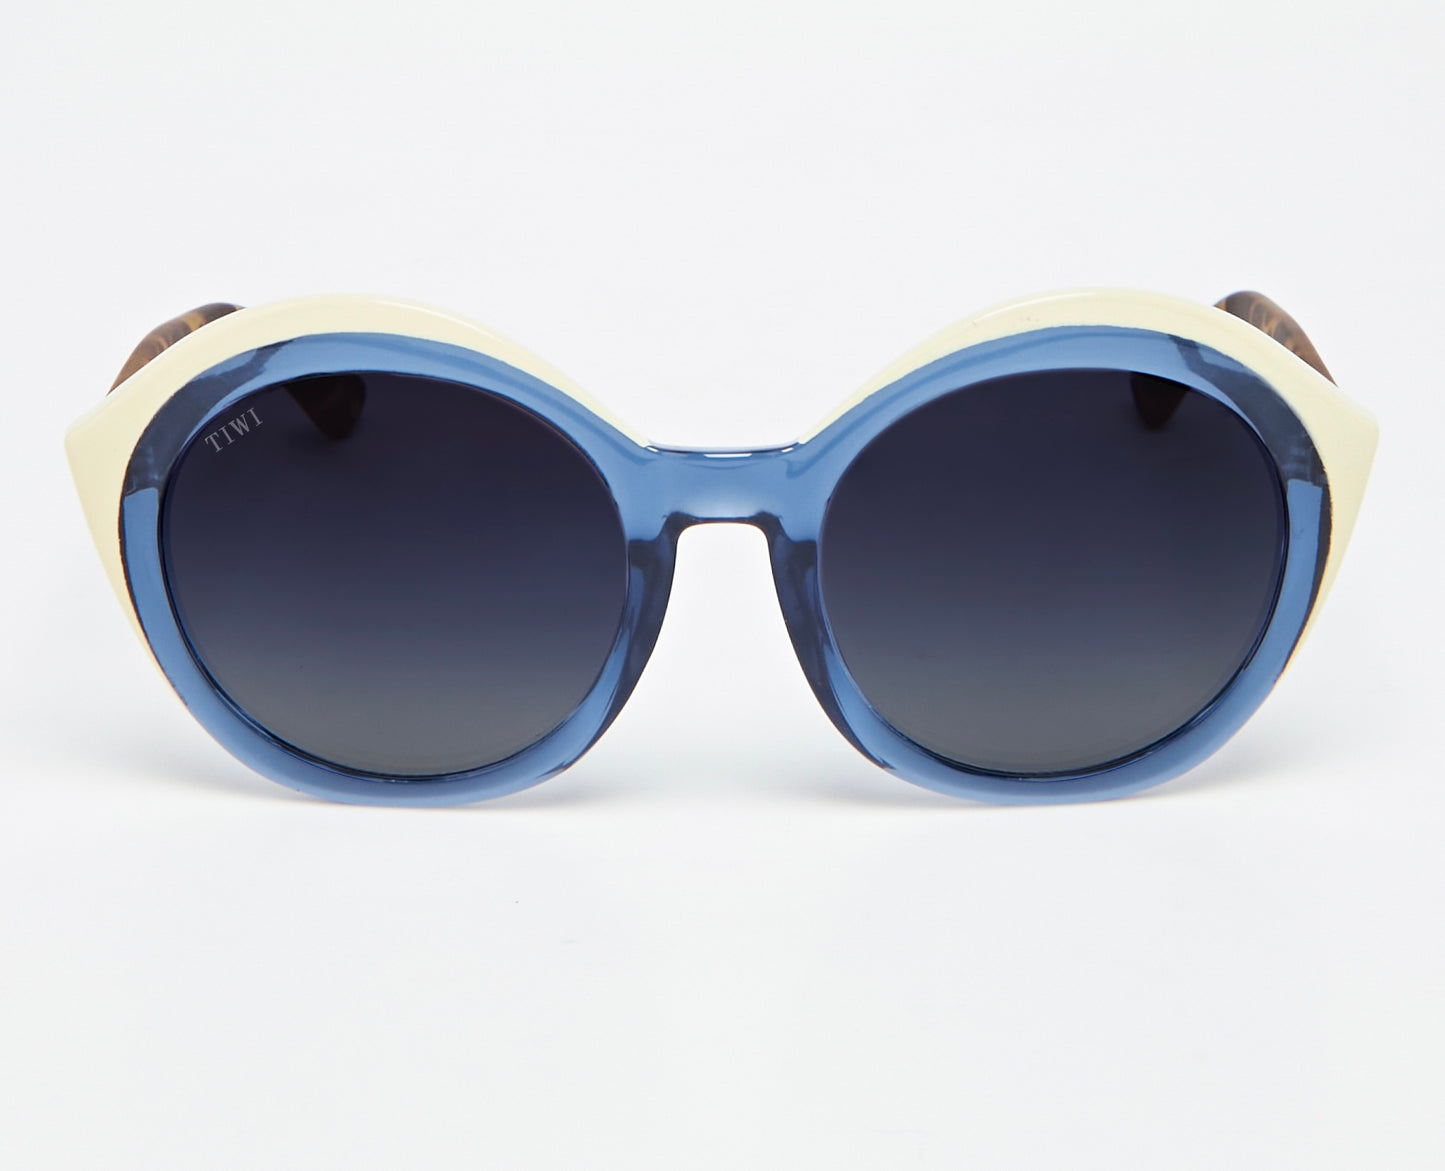 MELVILLE  Available in more colors Bicolor Shiny Ocean Blue/Beige with Blue Gradient Lenses  